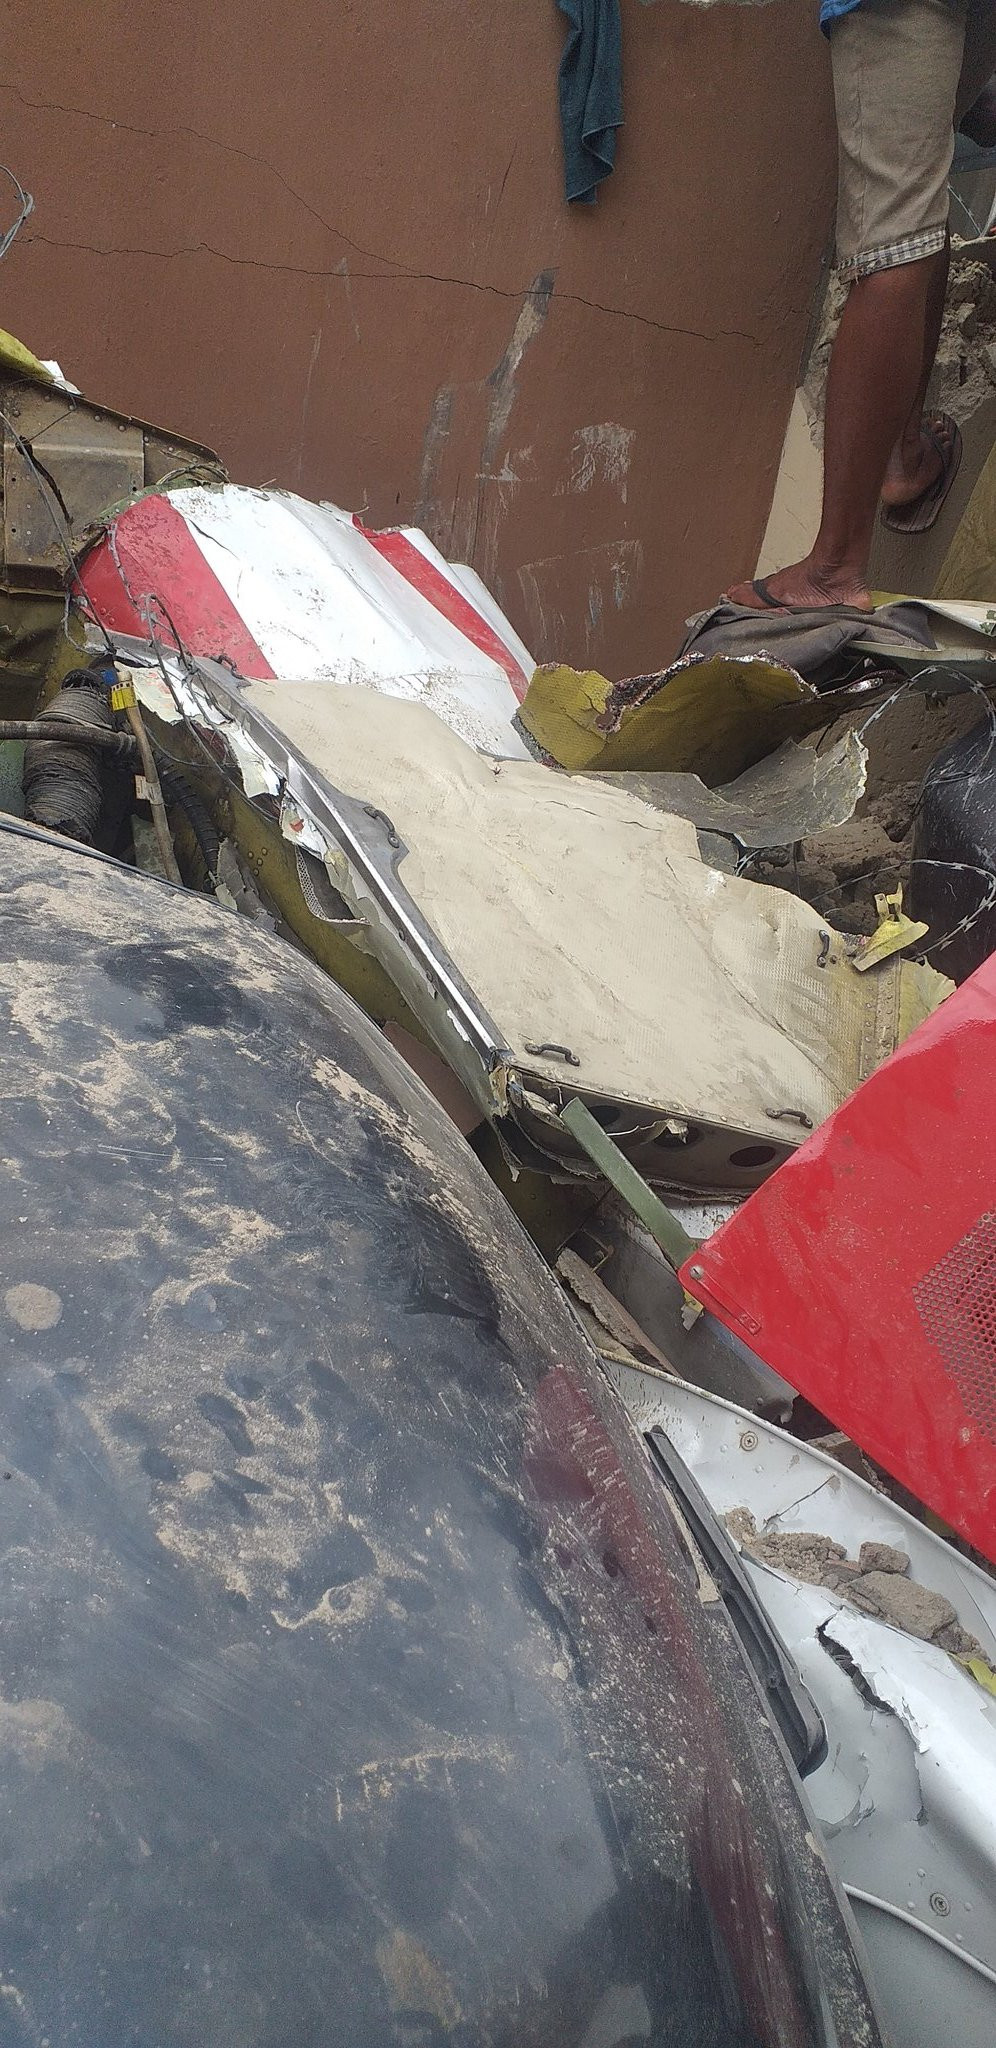 BREAKING NEWS: Helicopter Crashes Into Residential Building In Lagos